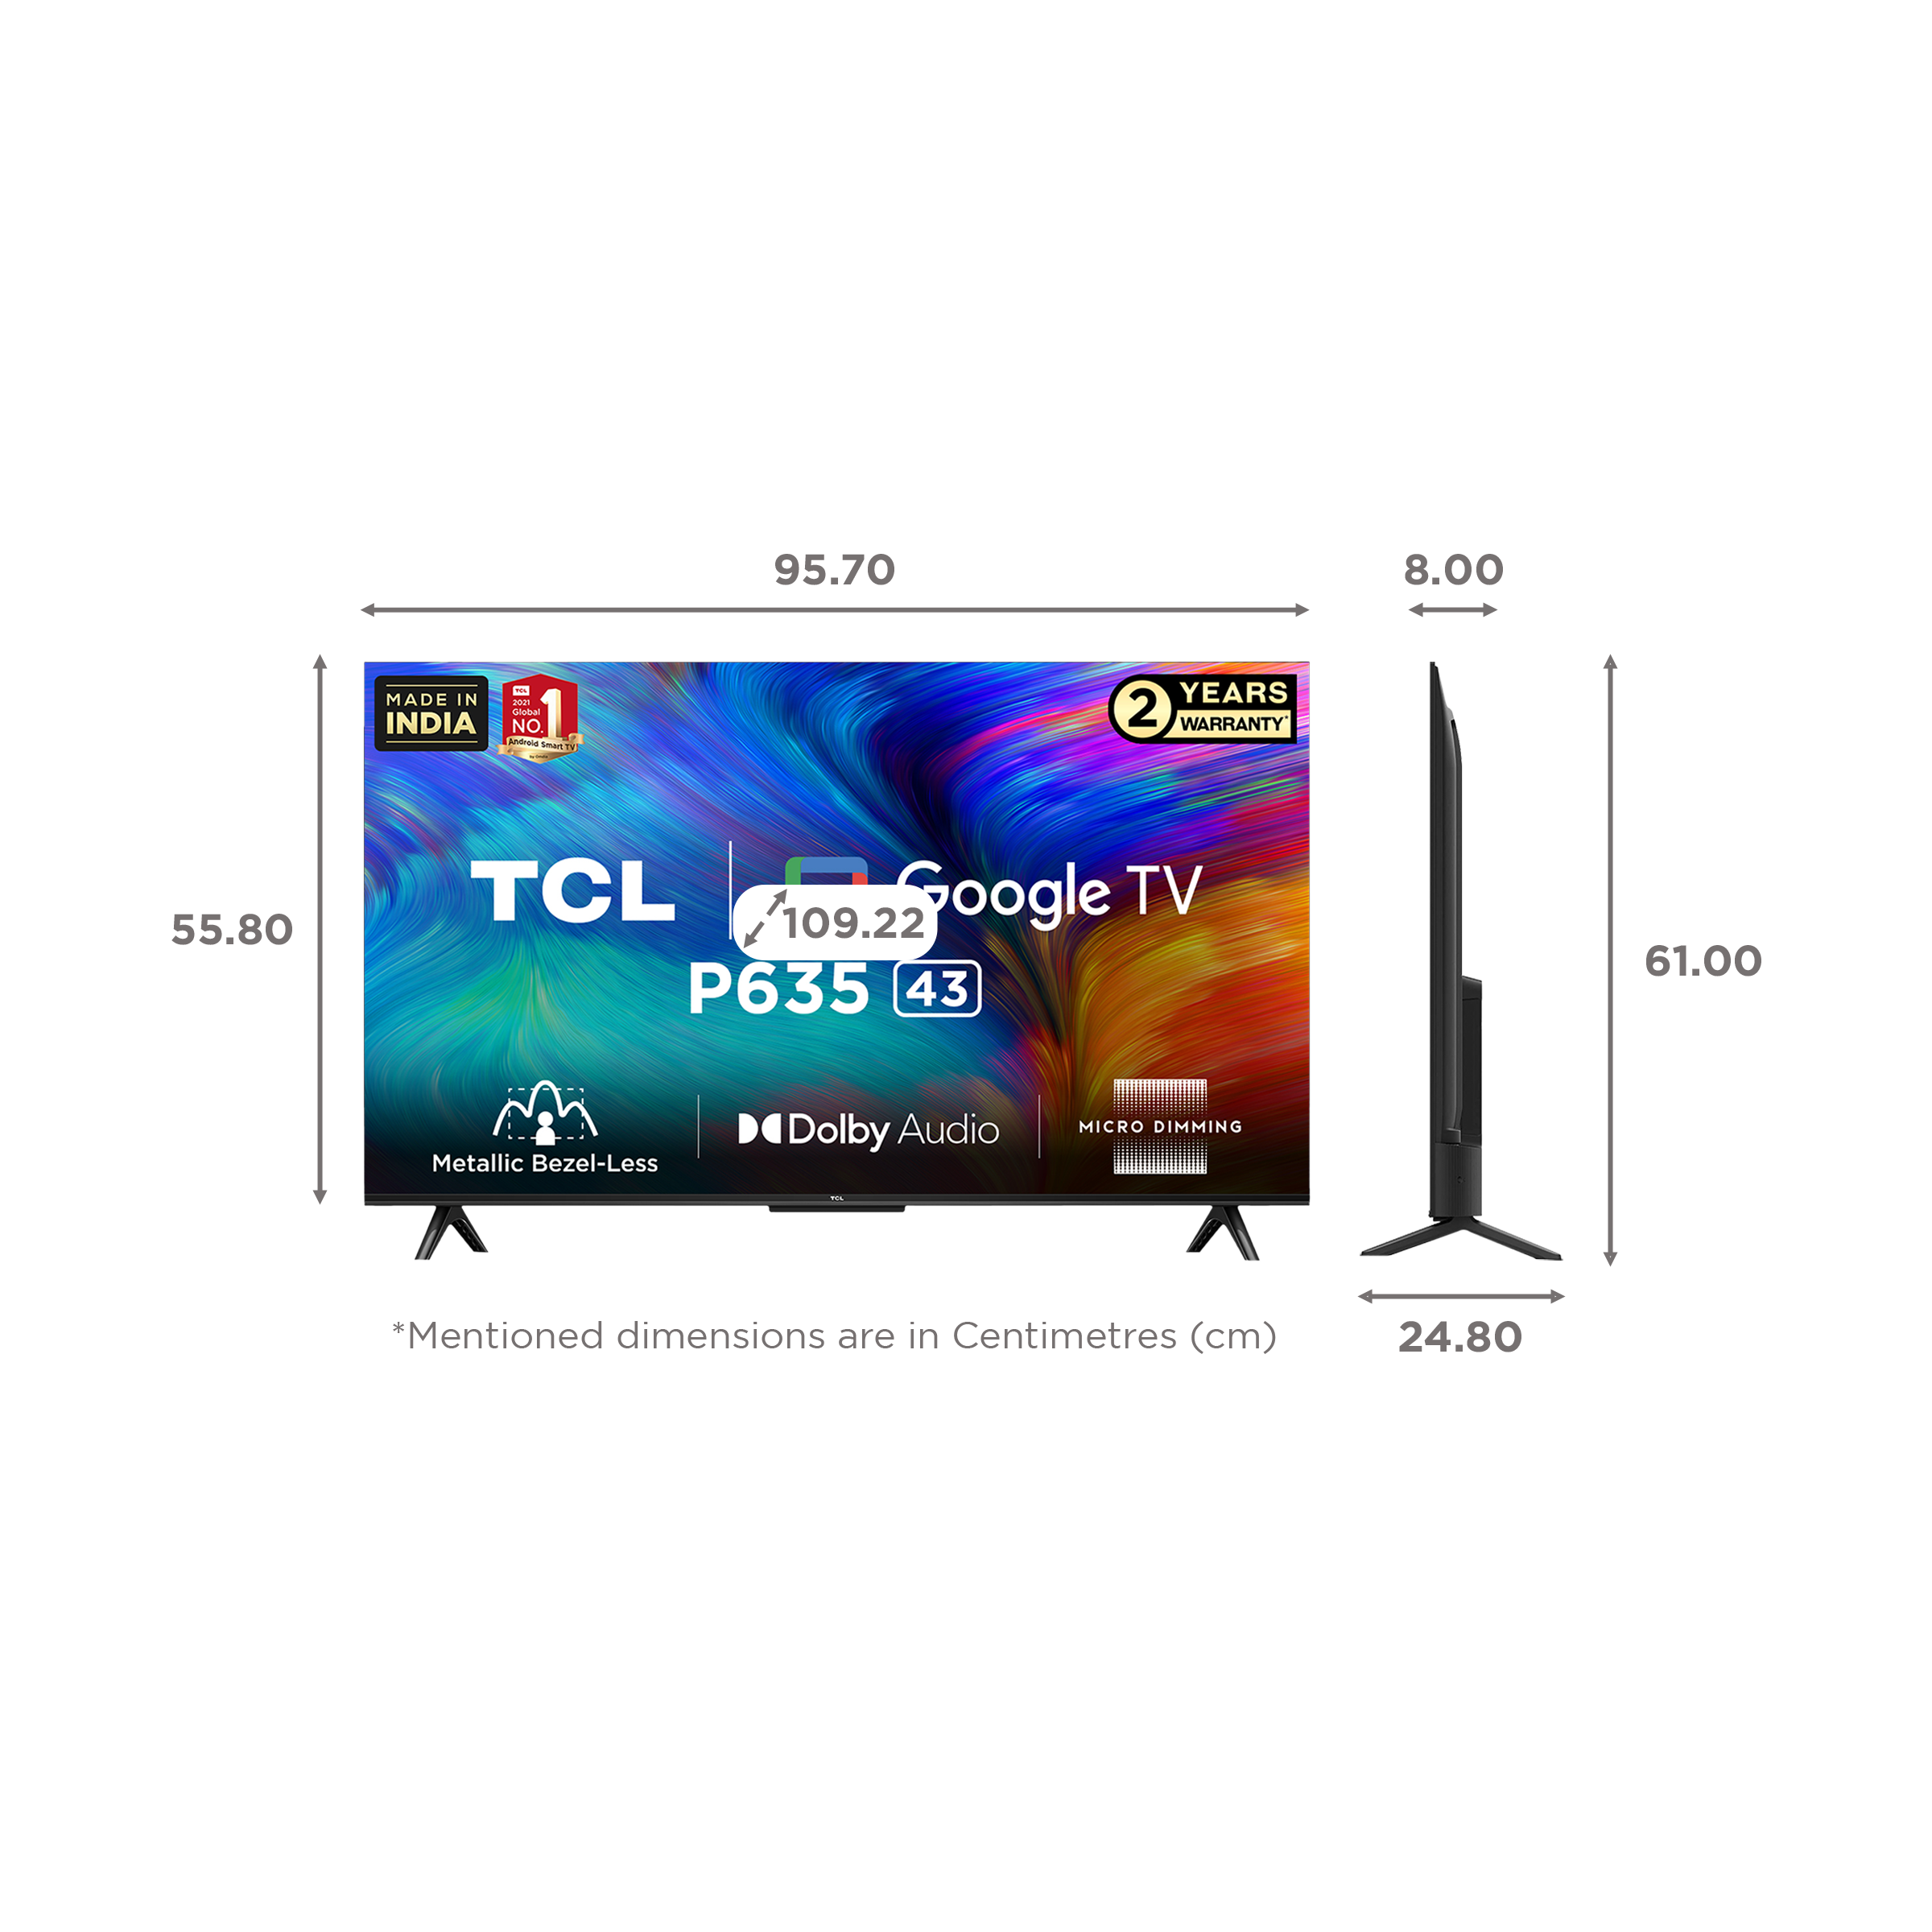 Buy TCL P635 109.22 cm (43 inch) 4K Ultra HD Google TV with Dolby Audio ...